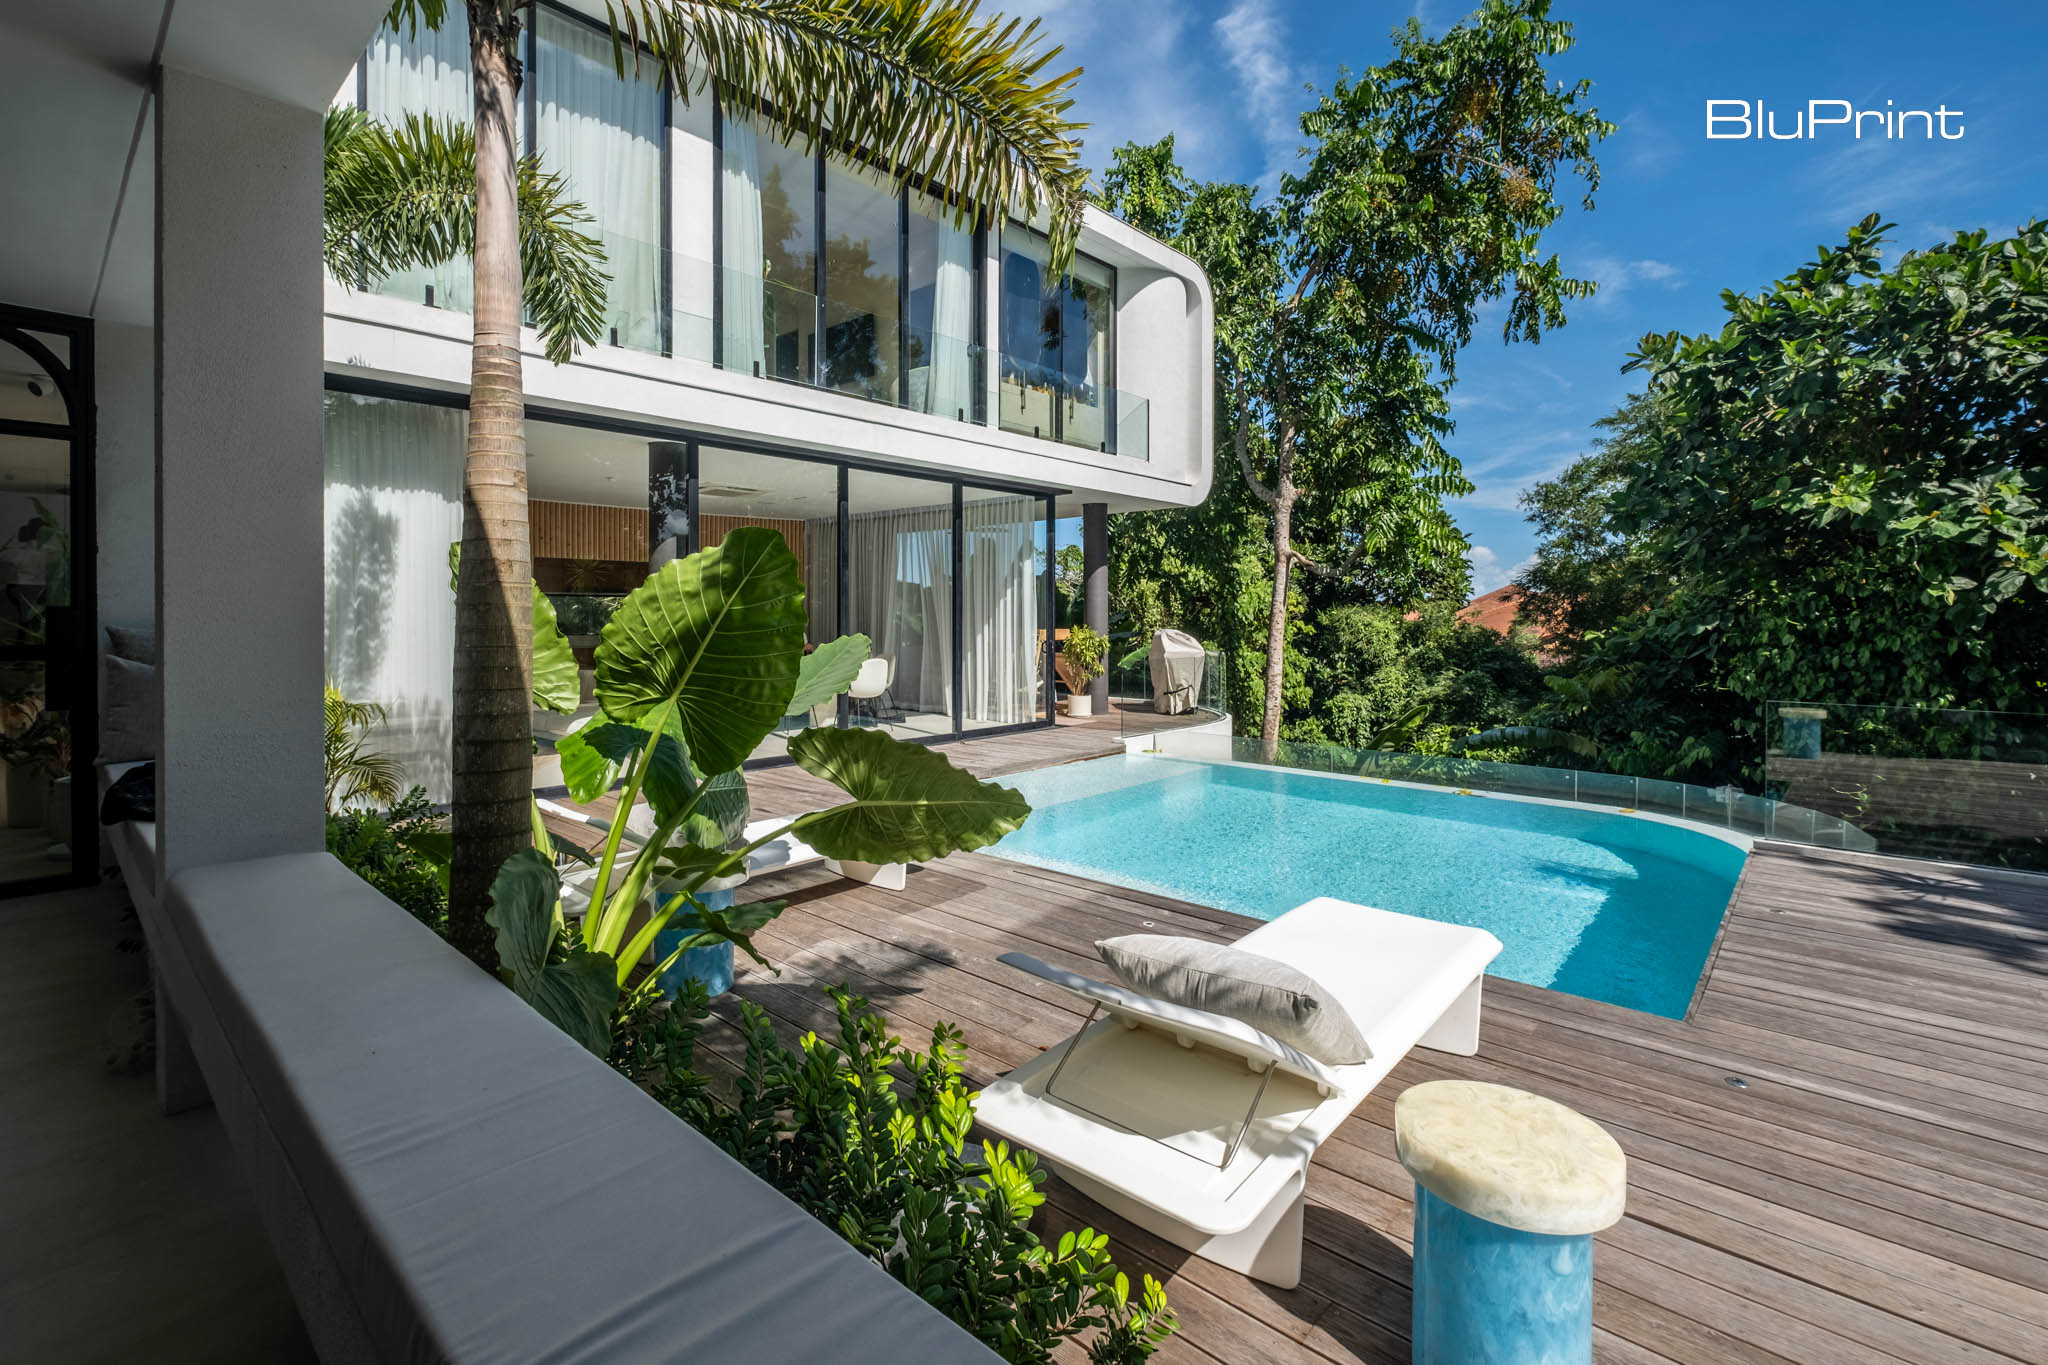 A modern tropical home with floor to ceiling windows looking out into a pool with wooden deck.